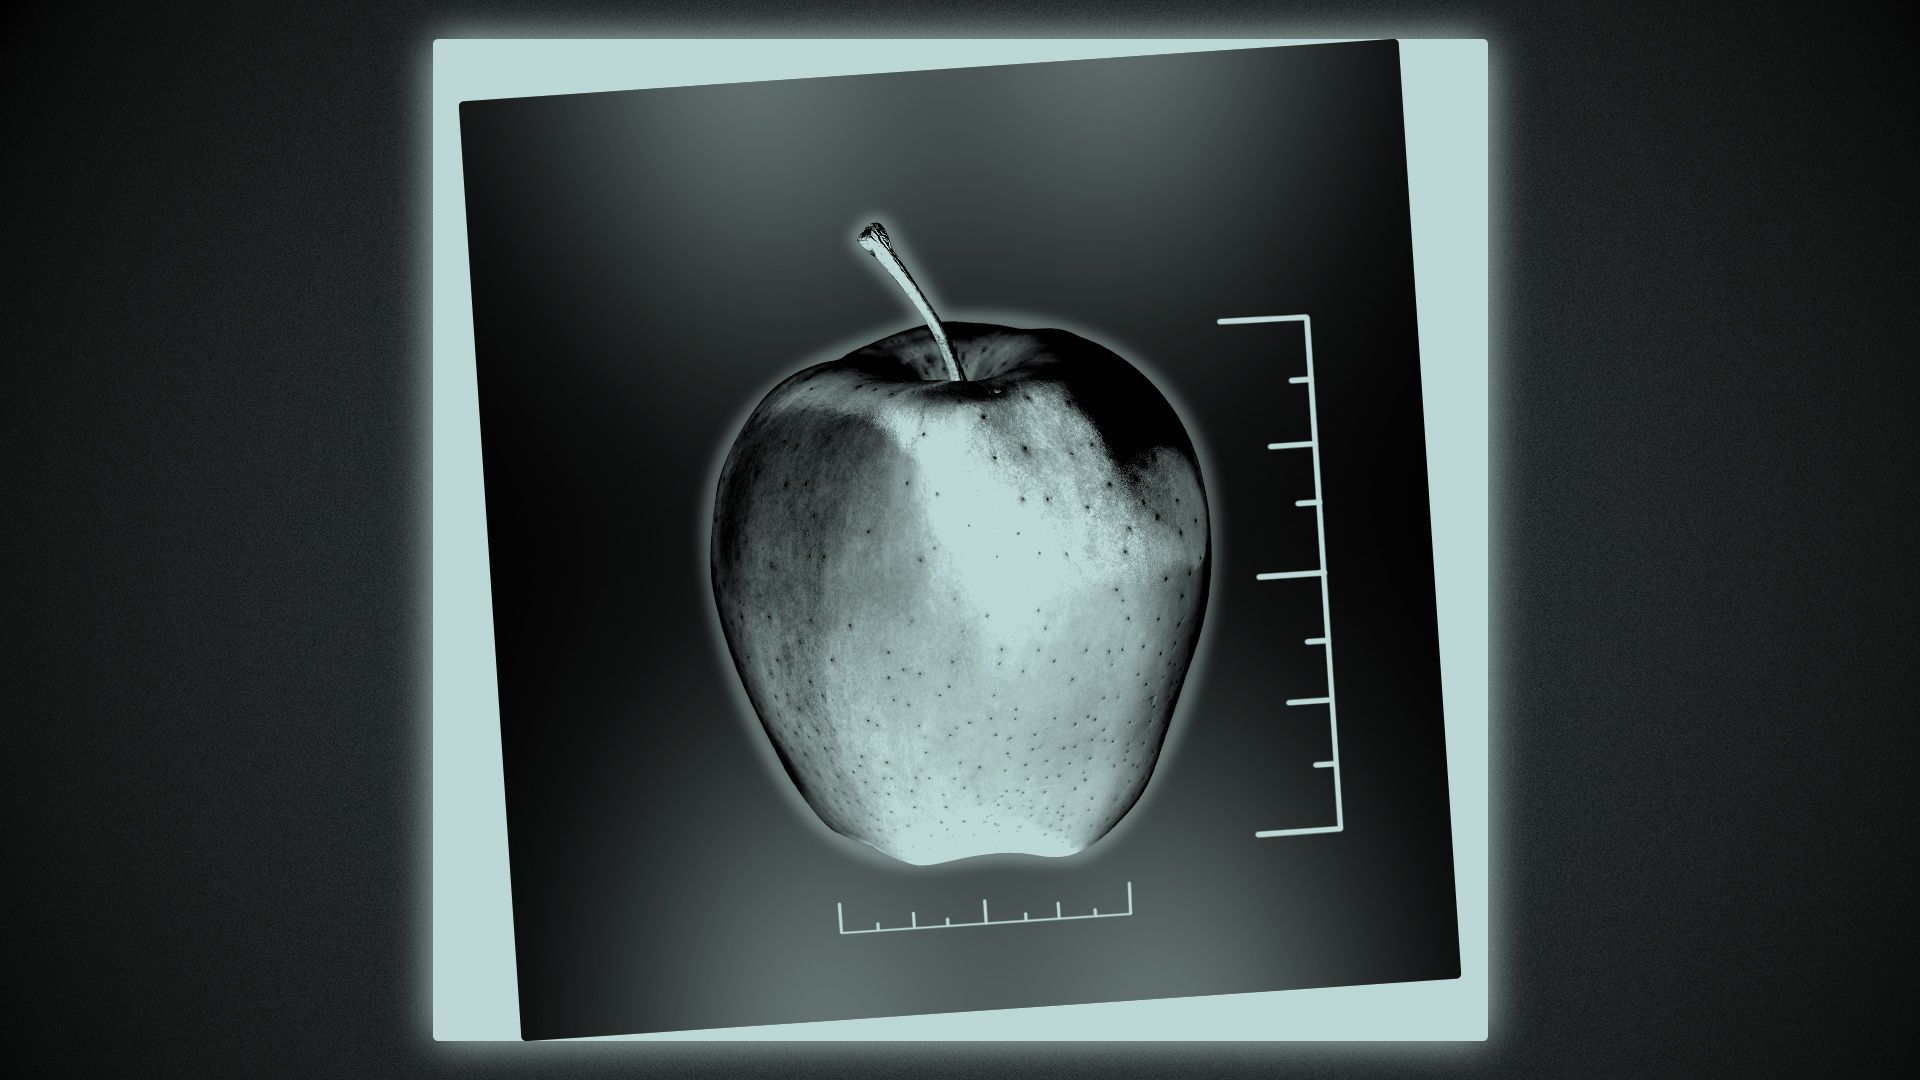 Illustration of an x-ray image of an apple.